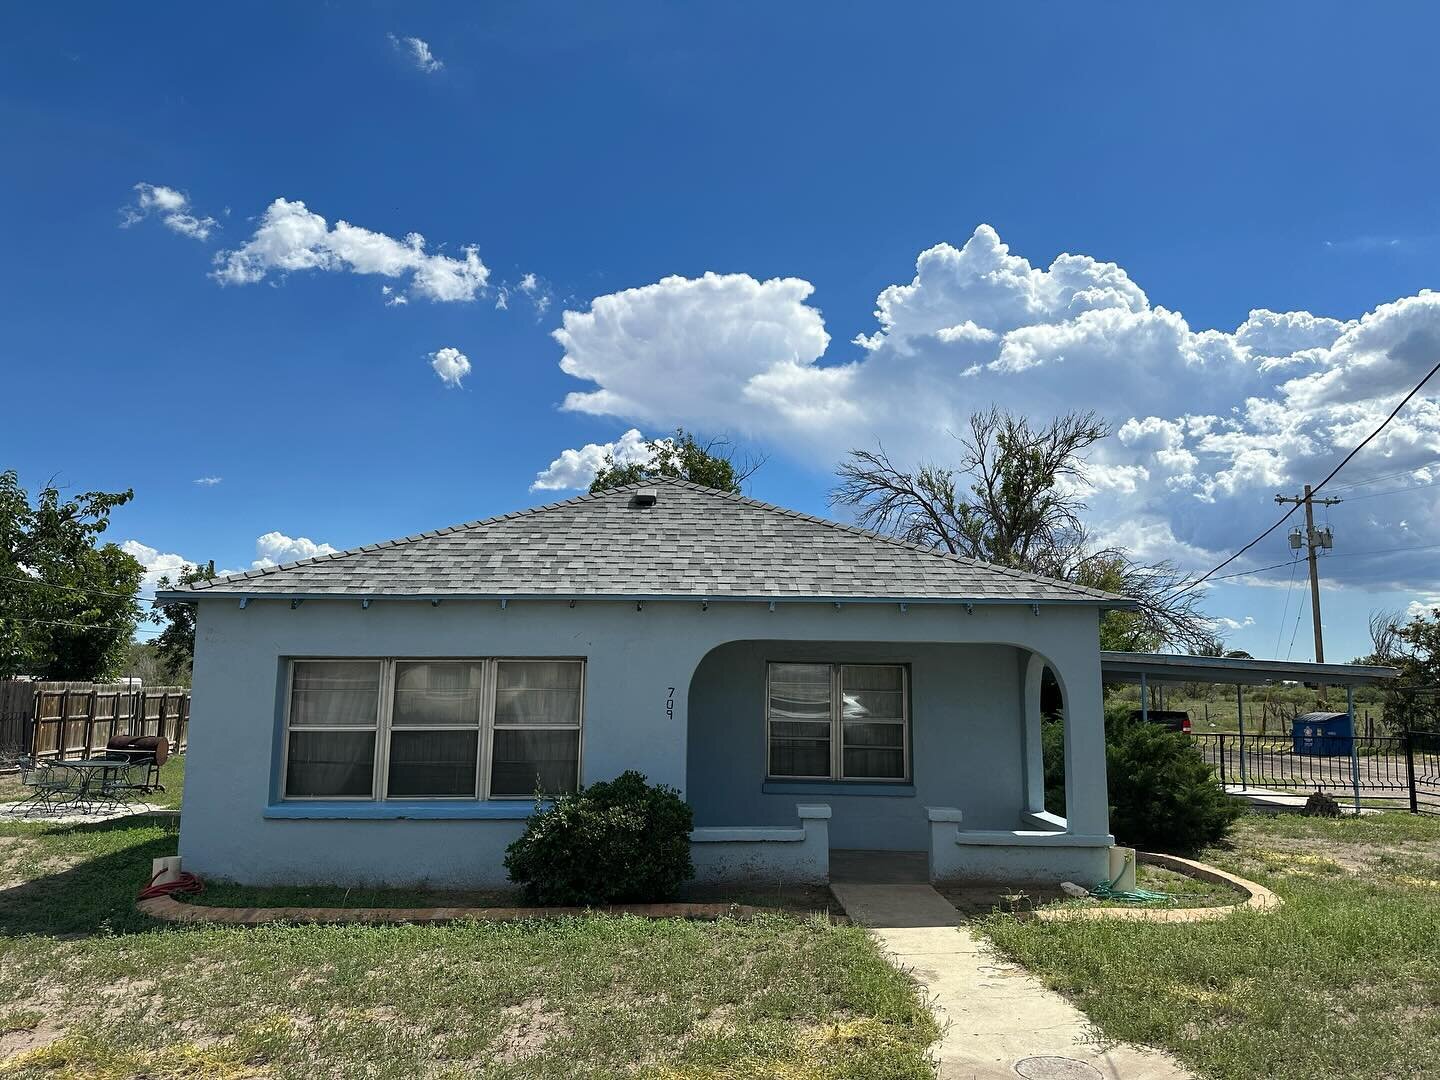 709 W Waco St Large Corner Lot with well kept 3 Bedroom / 2 Bathroom Family home - bonus building behind the house overlooking the parade grounds in good standing formerly a barrack at Fort D. A. Russell adds to the charm &amp; possibility $550,000 @